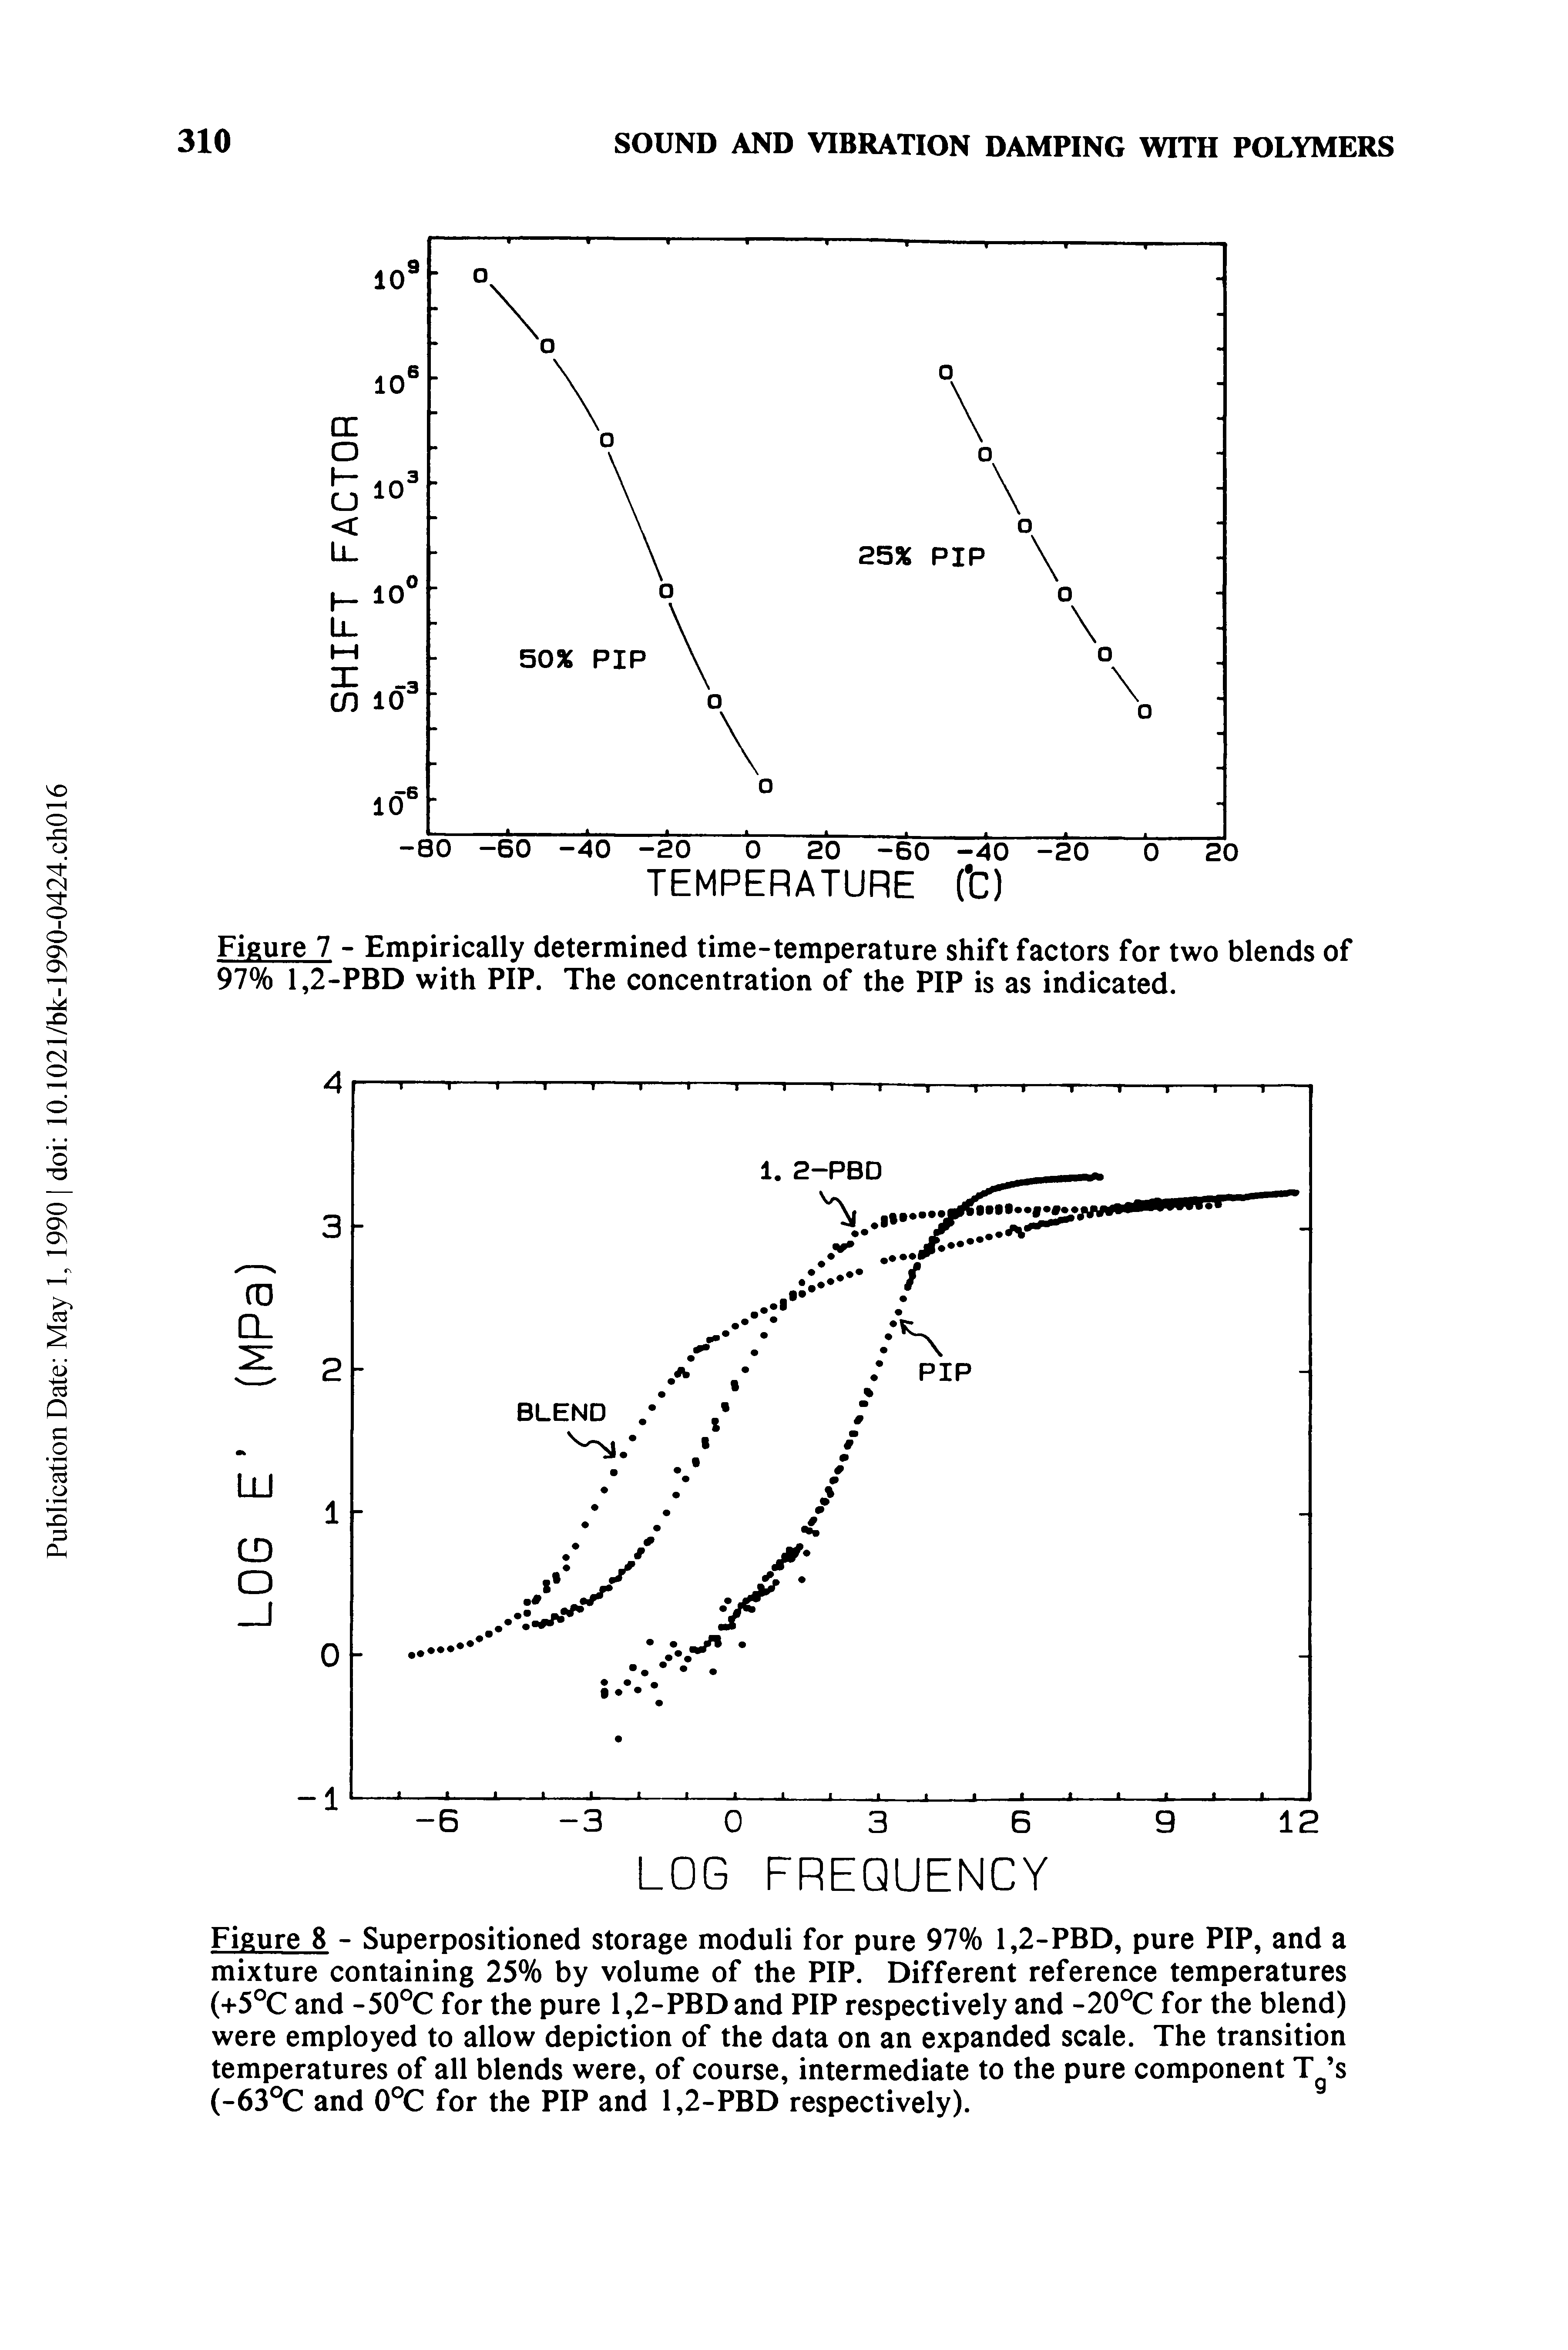 Figure 7 - Empirically determined time-temperature shift factors for two blends of 97% 1,2-PBD with PIP. The concentration of the PIP is as indicated.